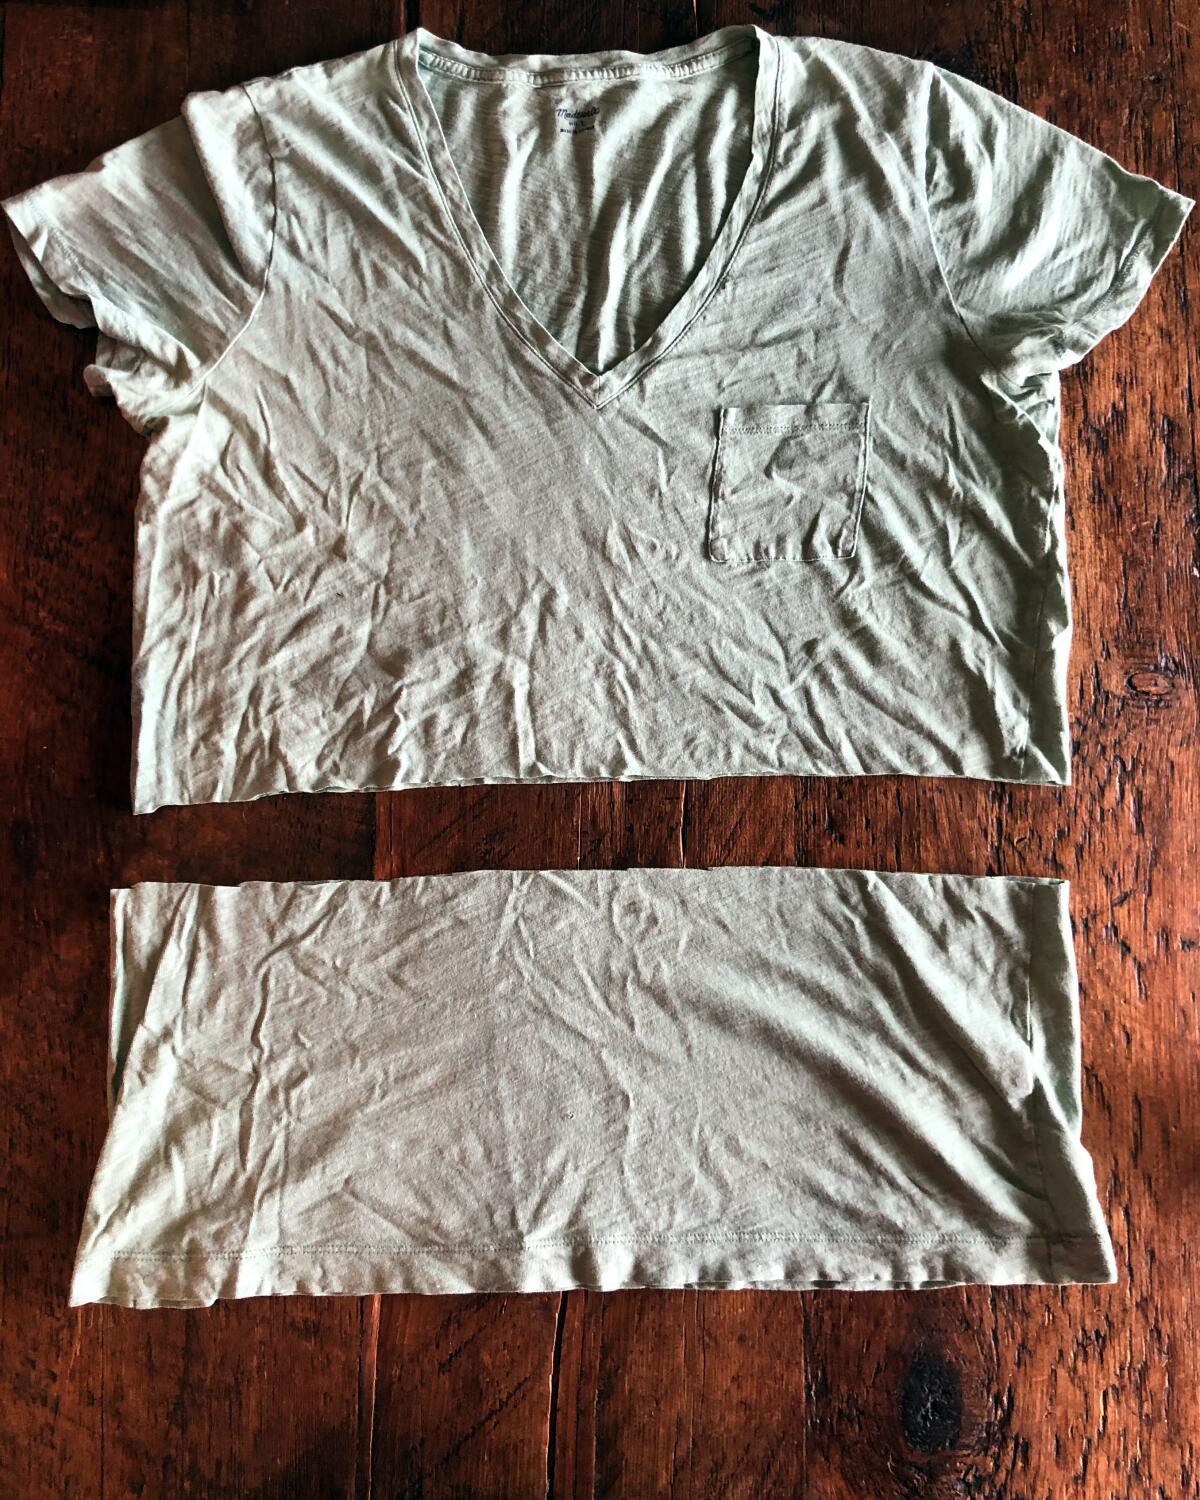 A cotton T-shirt can be cut and worn as a mask to slow the spread of COVID-19.